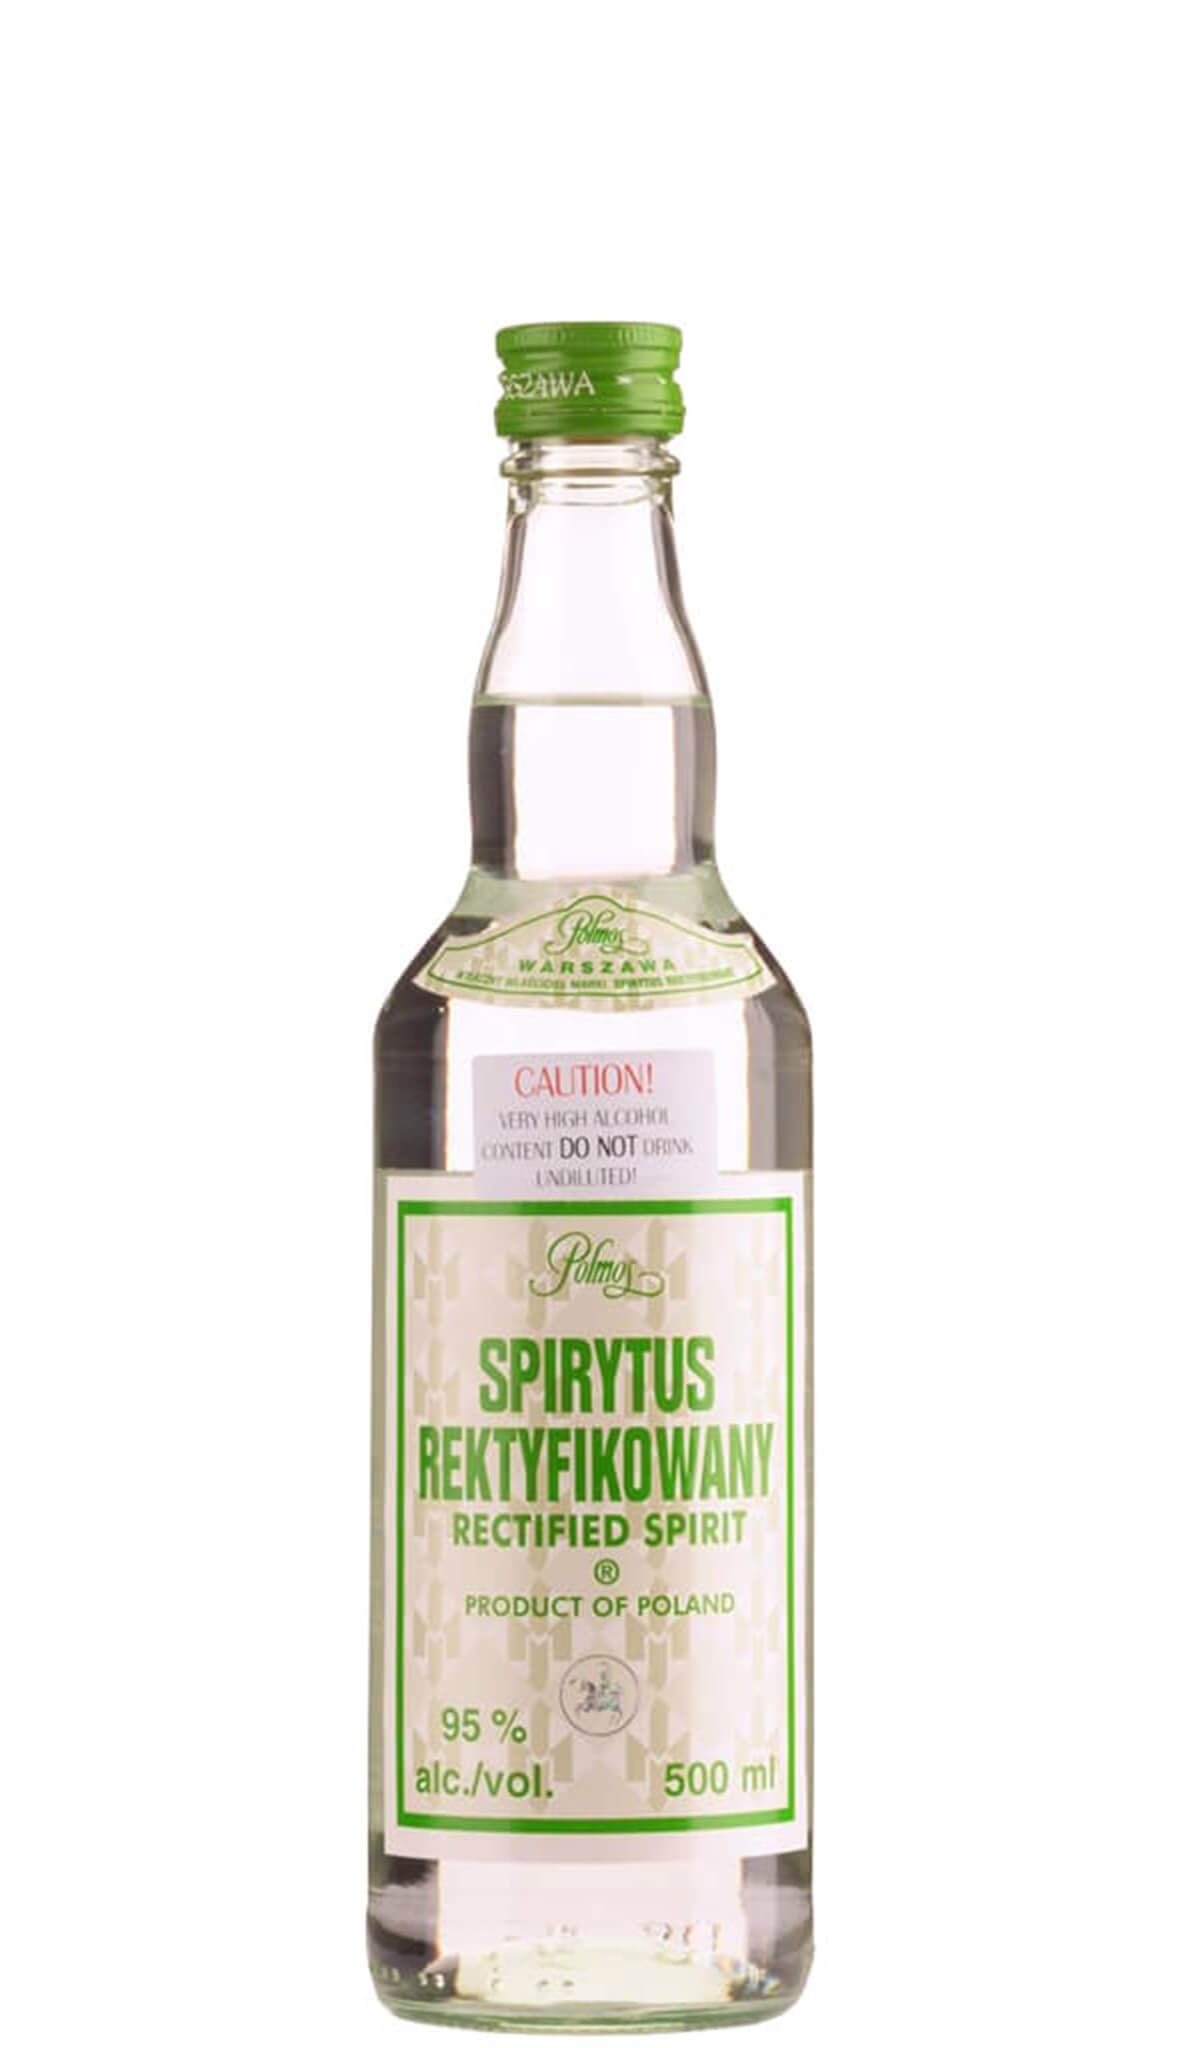 Find out more or buy Polmos Spirytus Rektyfikowany (Rectified Spirit) 190 Proof 95% online at Wine Sellers Direct - Australia’s independent liquor specialists.